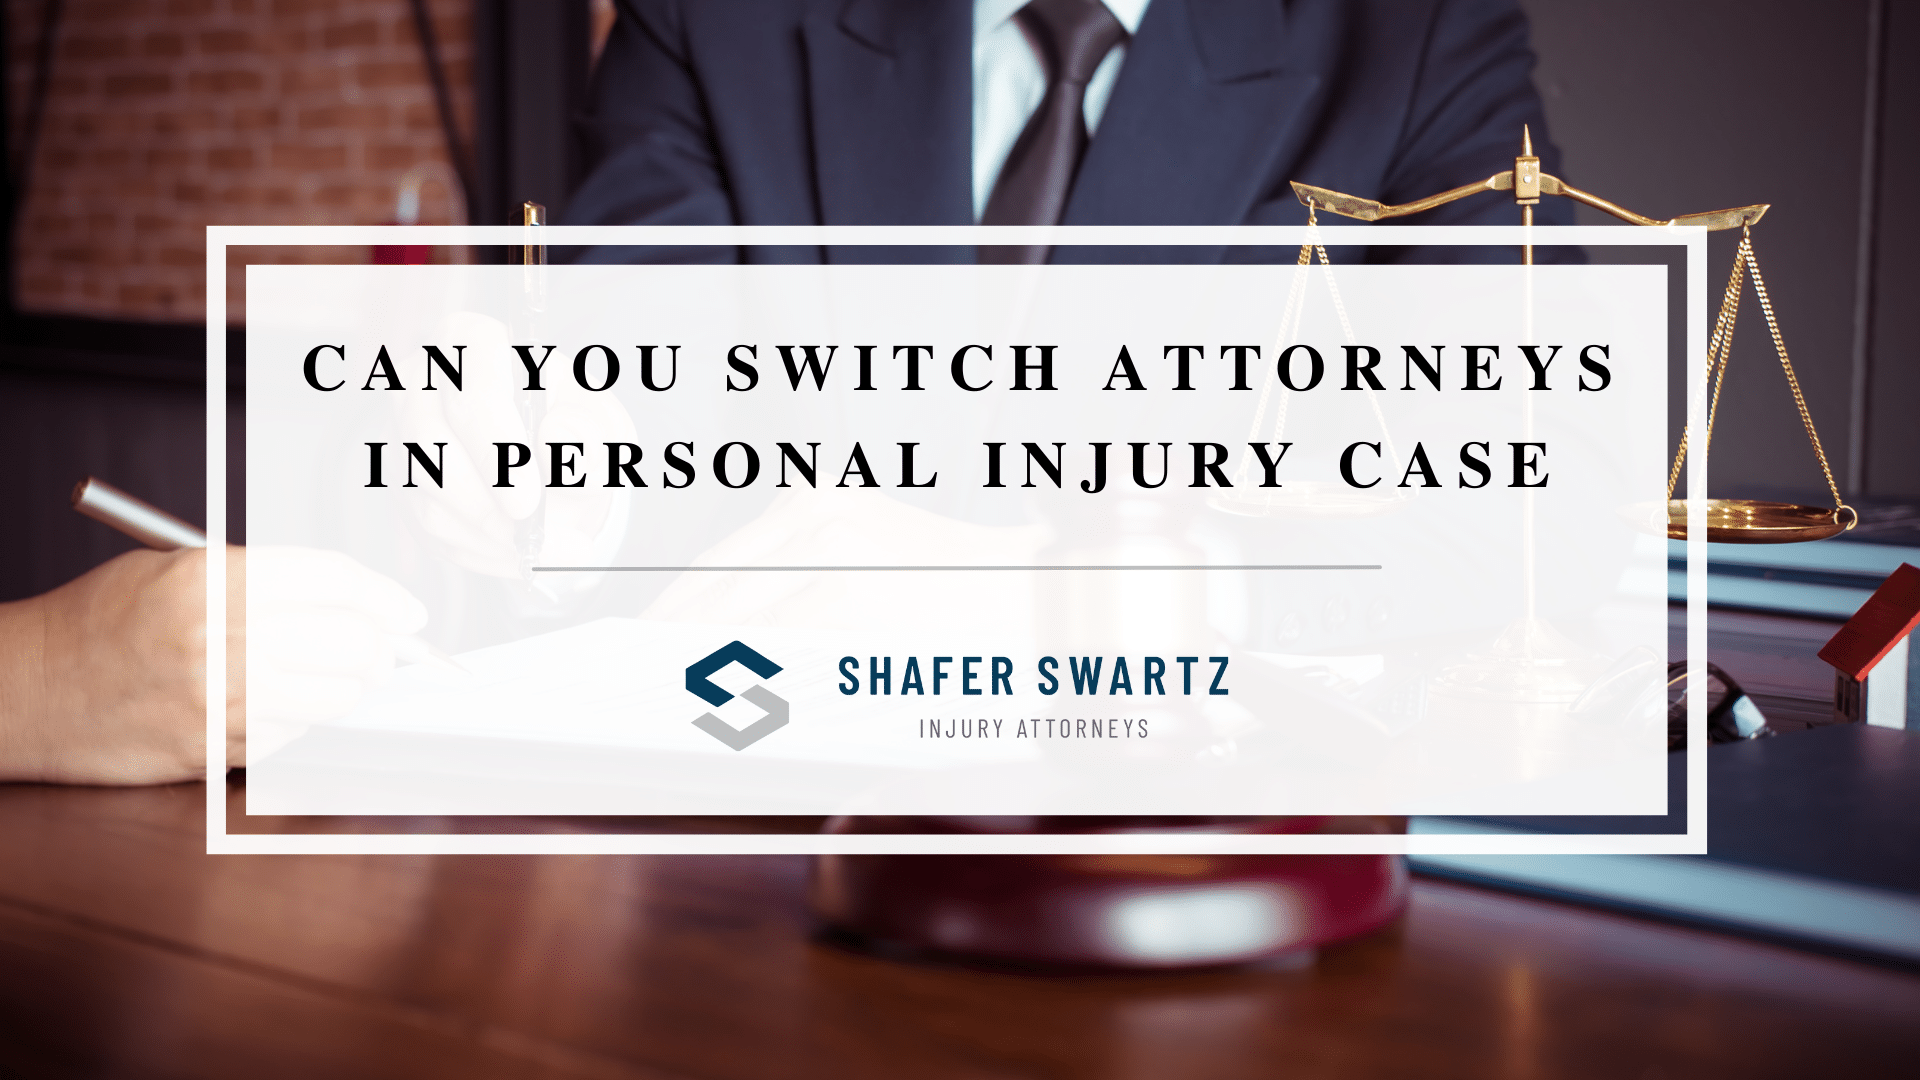 Featured image of can I switch attorneys in personal injury case